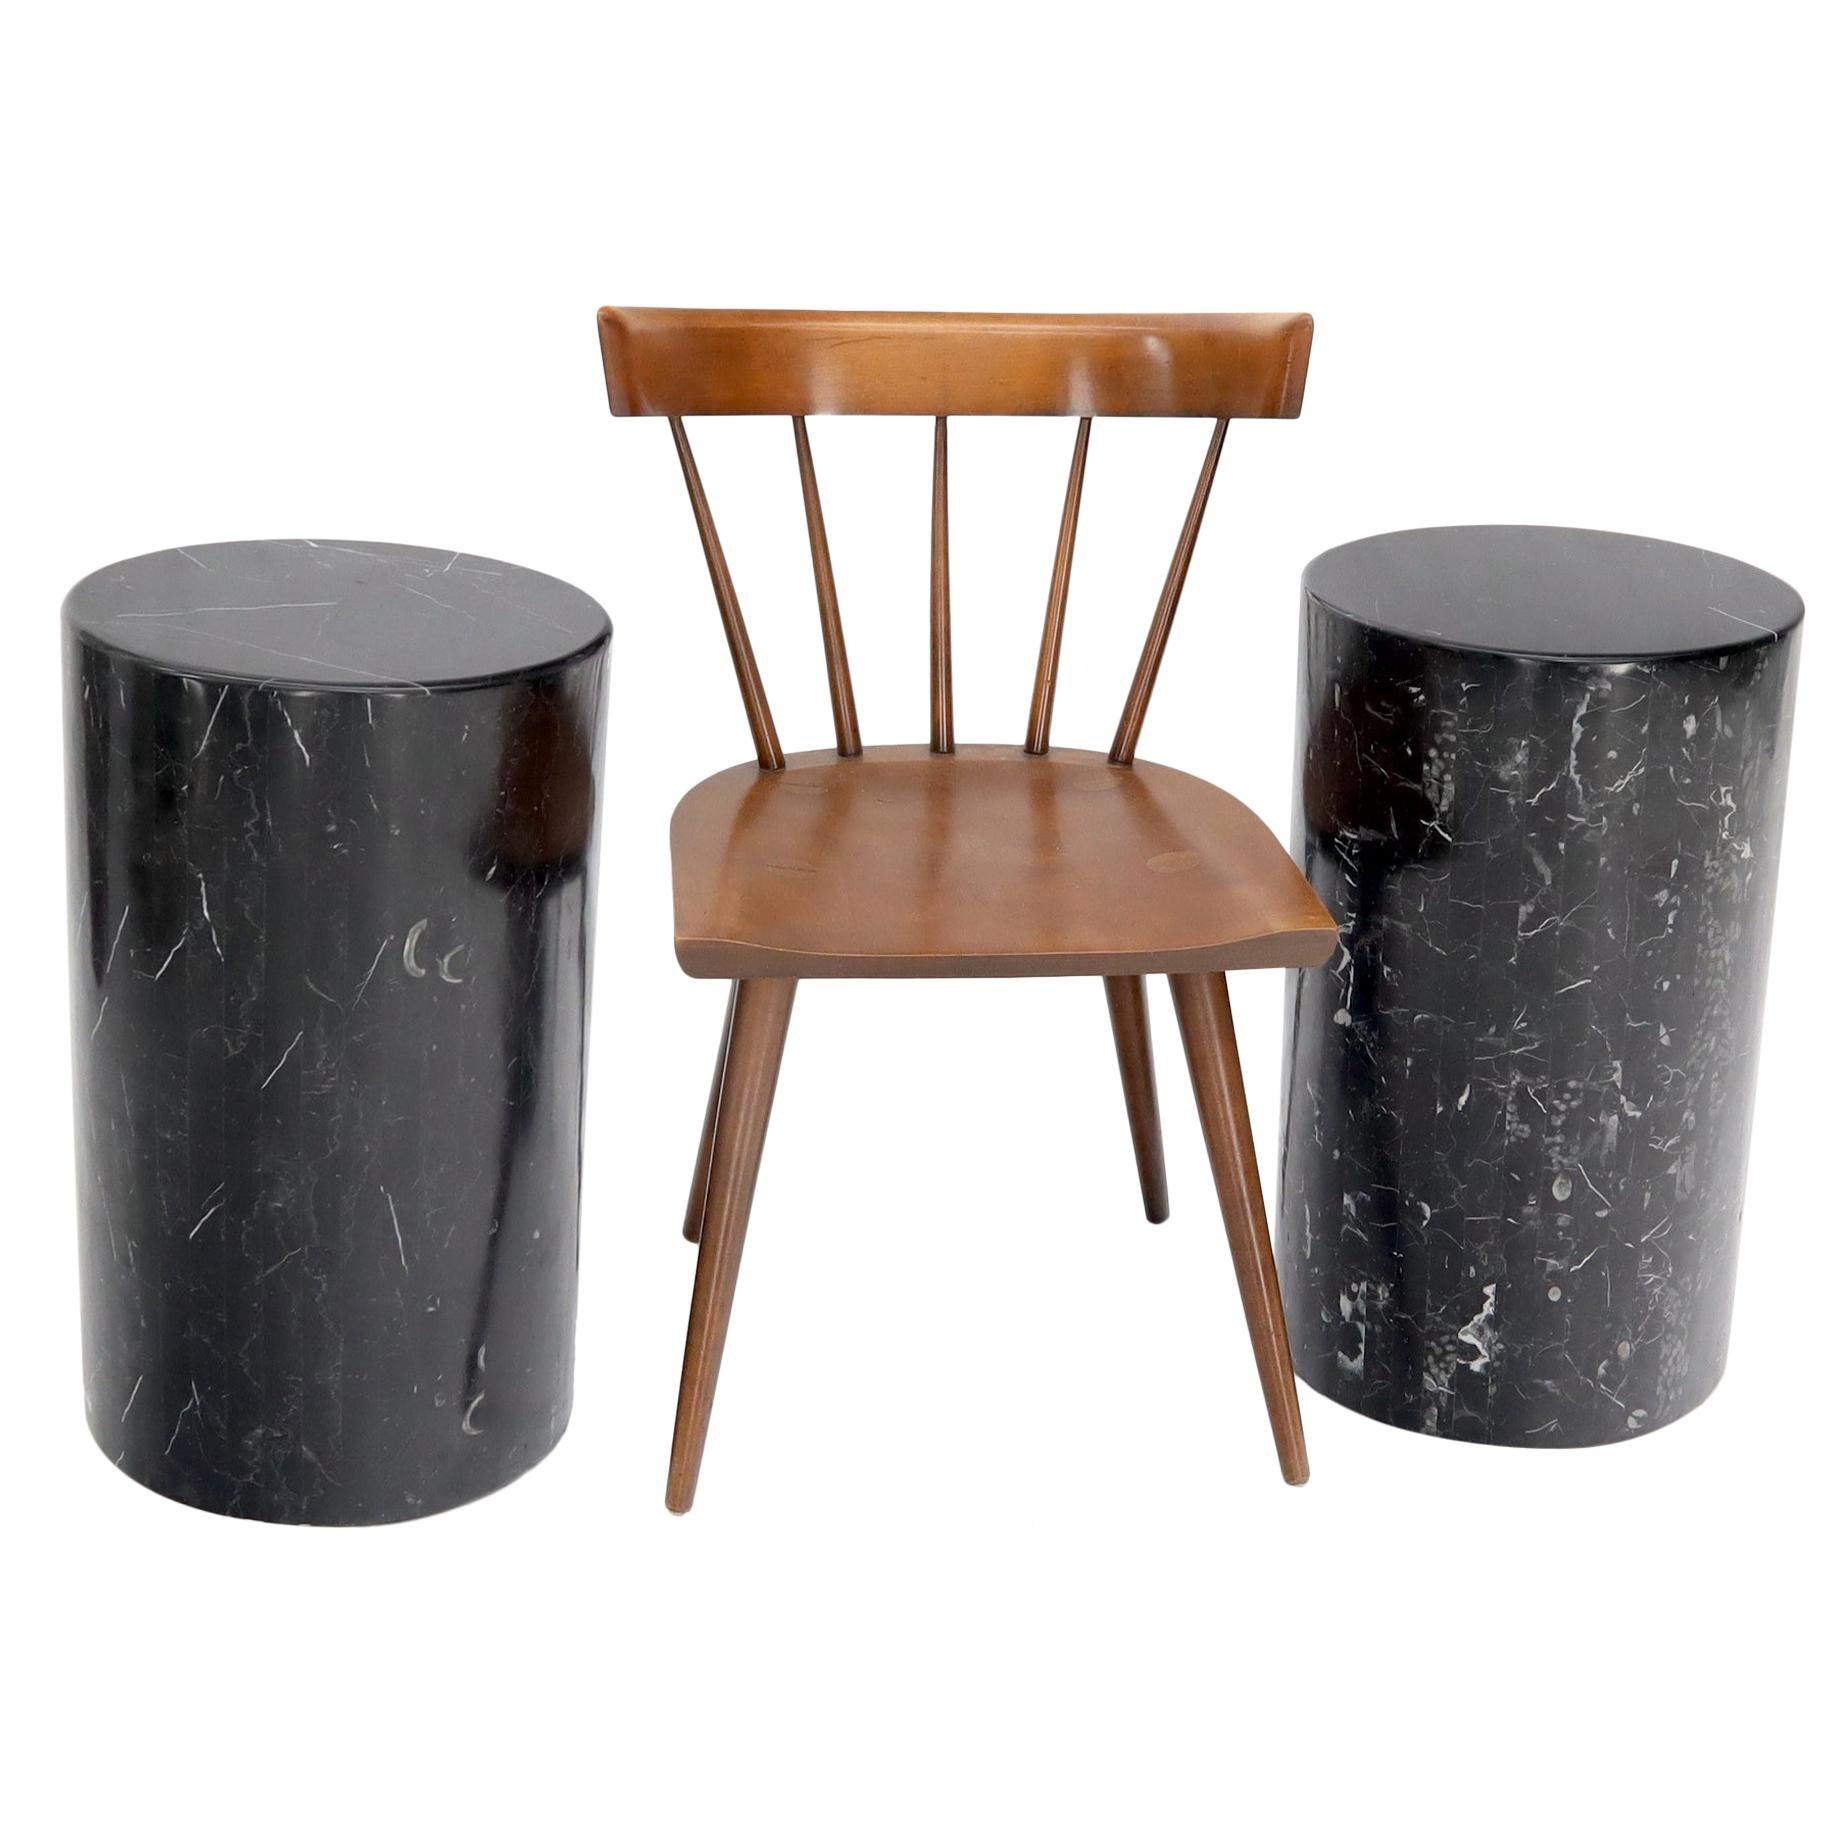 Pair of Black Marble Stone Veneer Sheeted Tiled Round Cylinder Pedestals For Sale